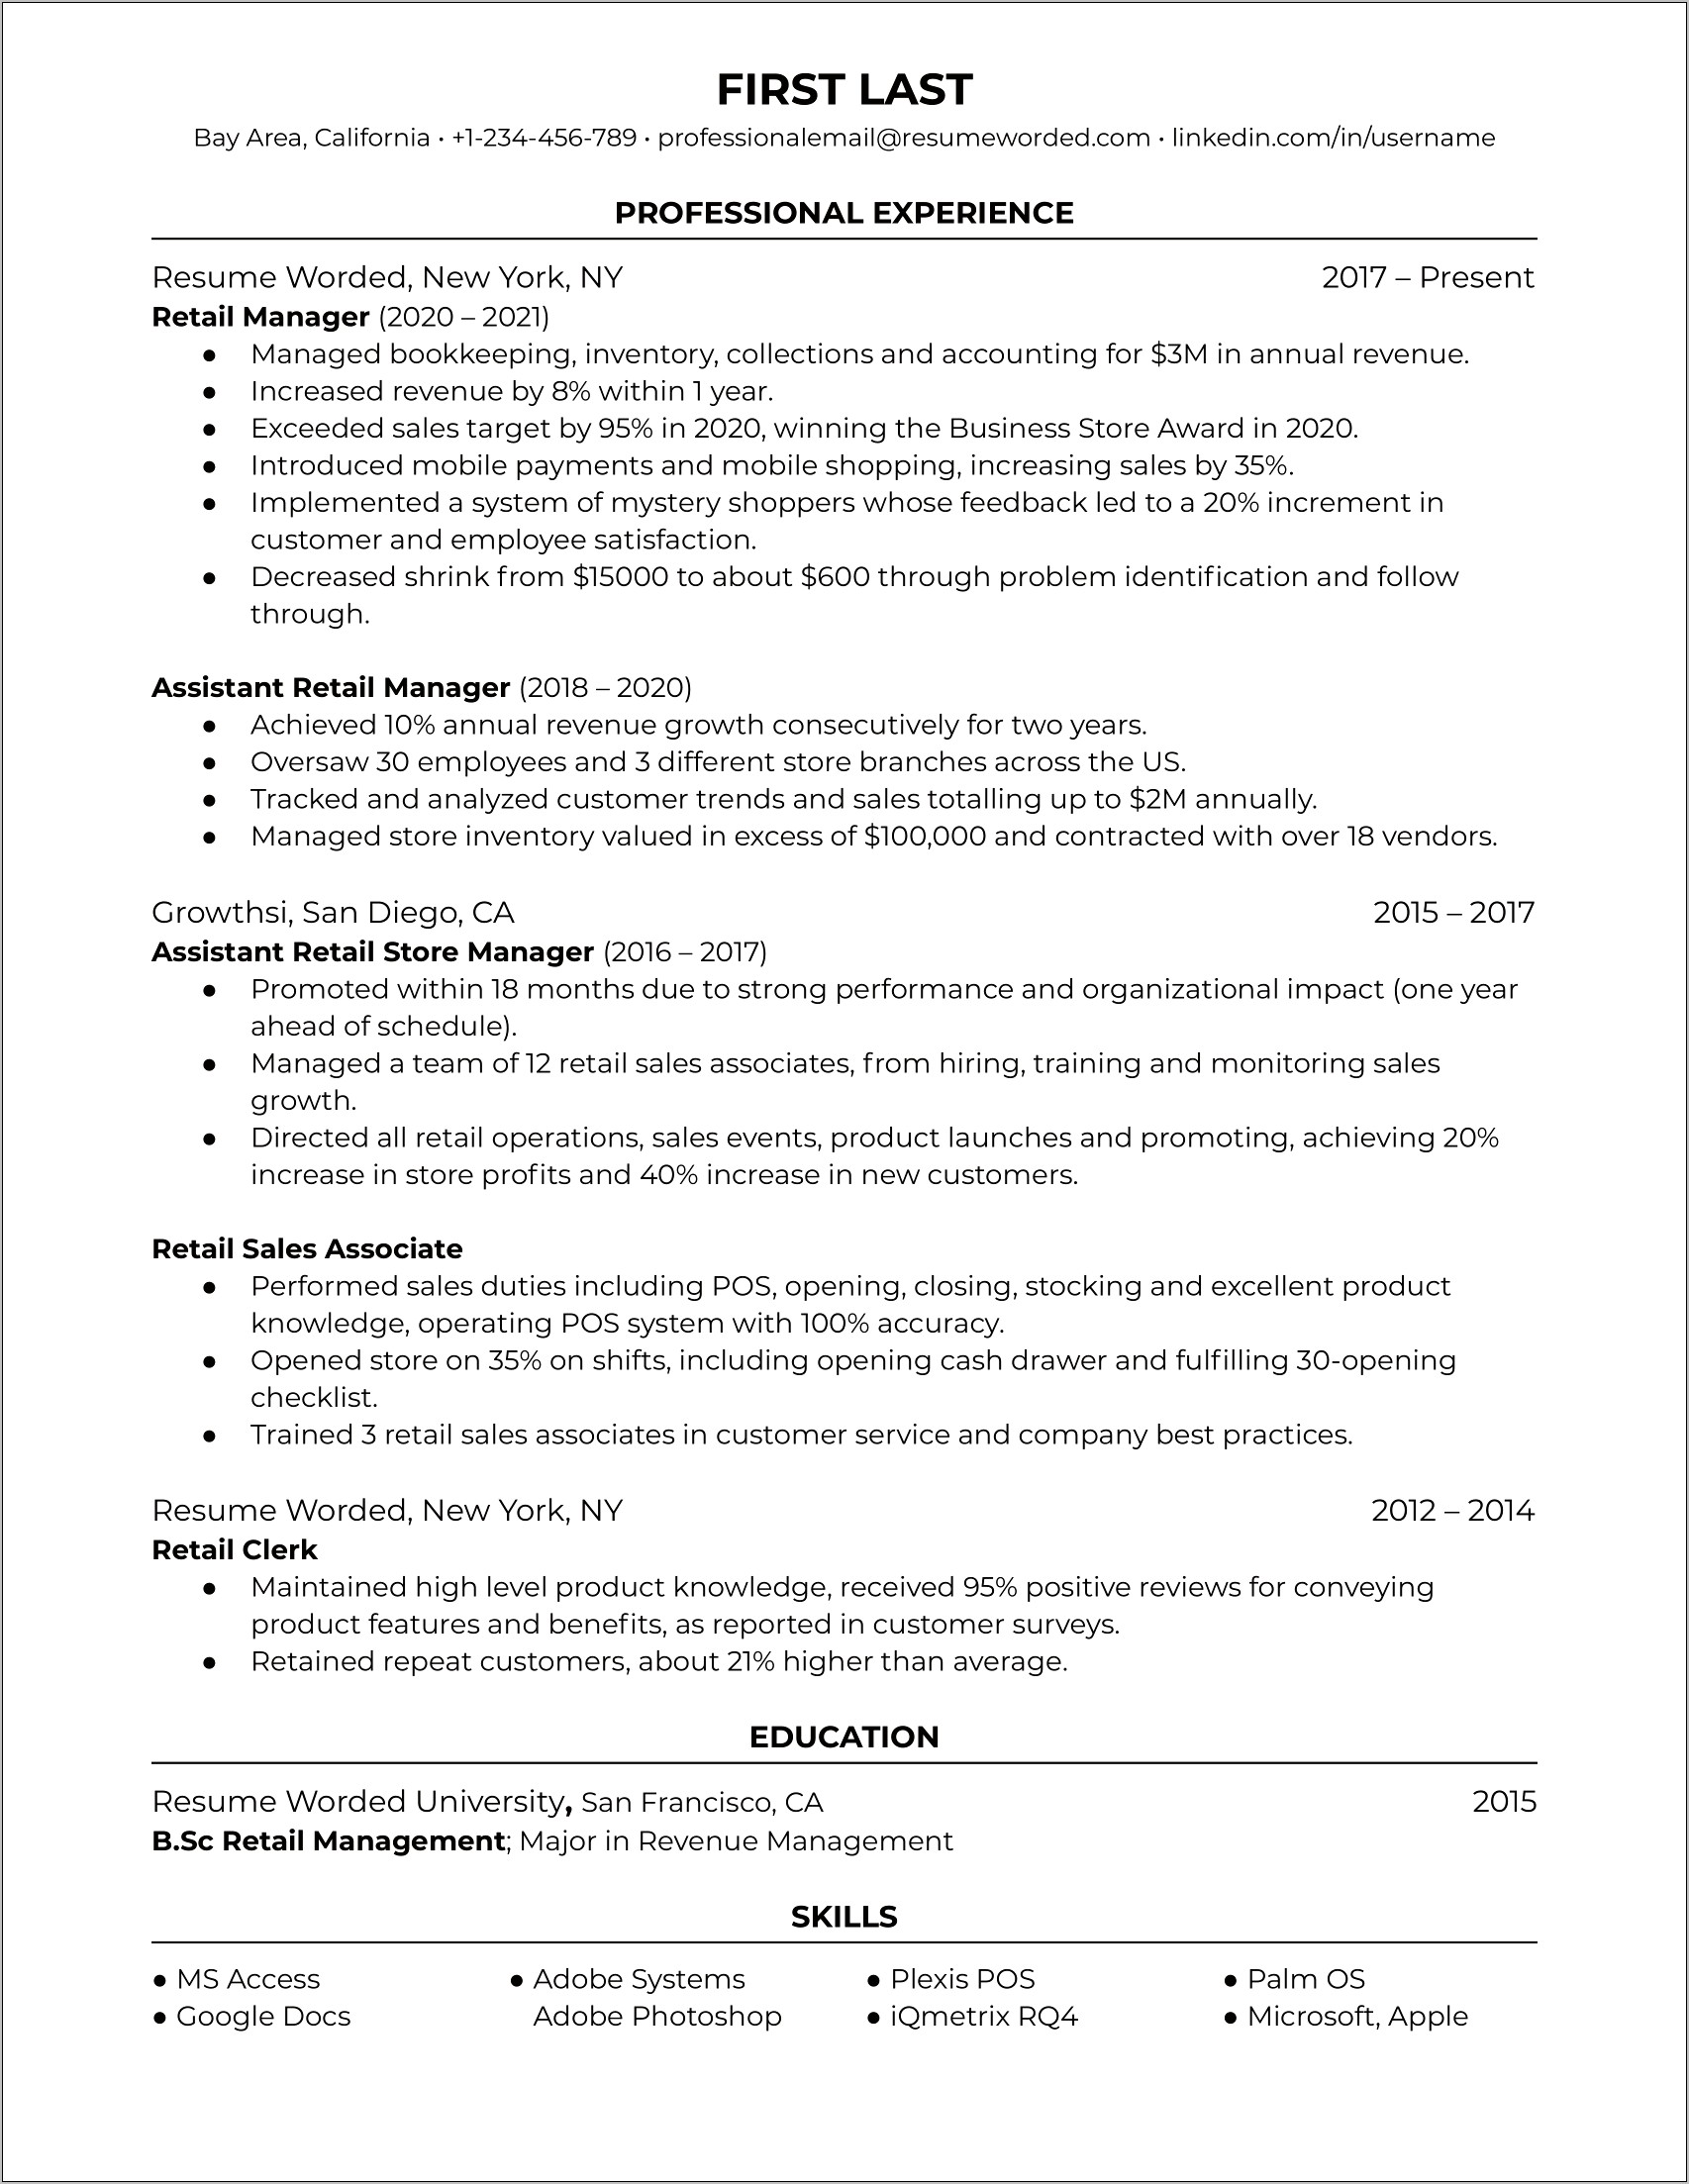 Sample Resume For Retail Management Position